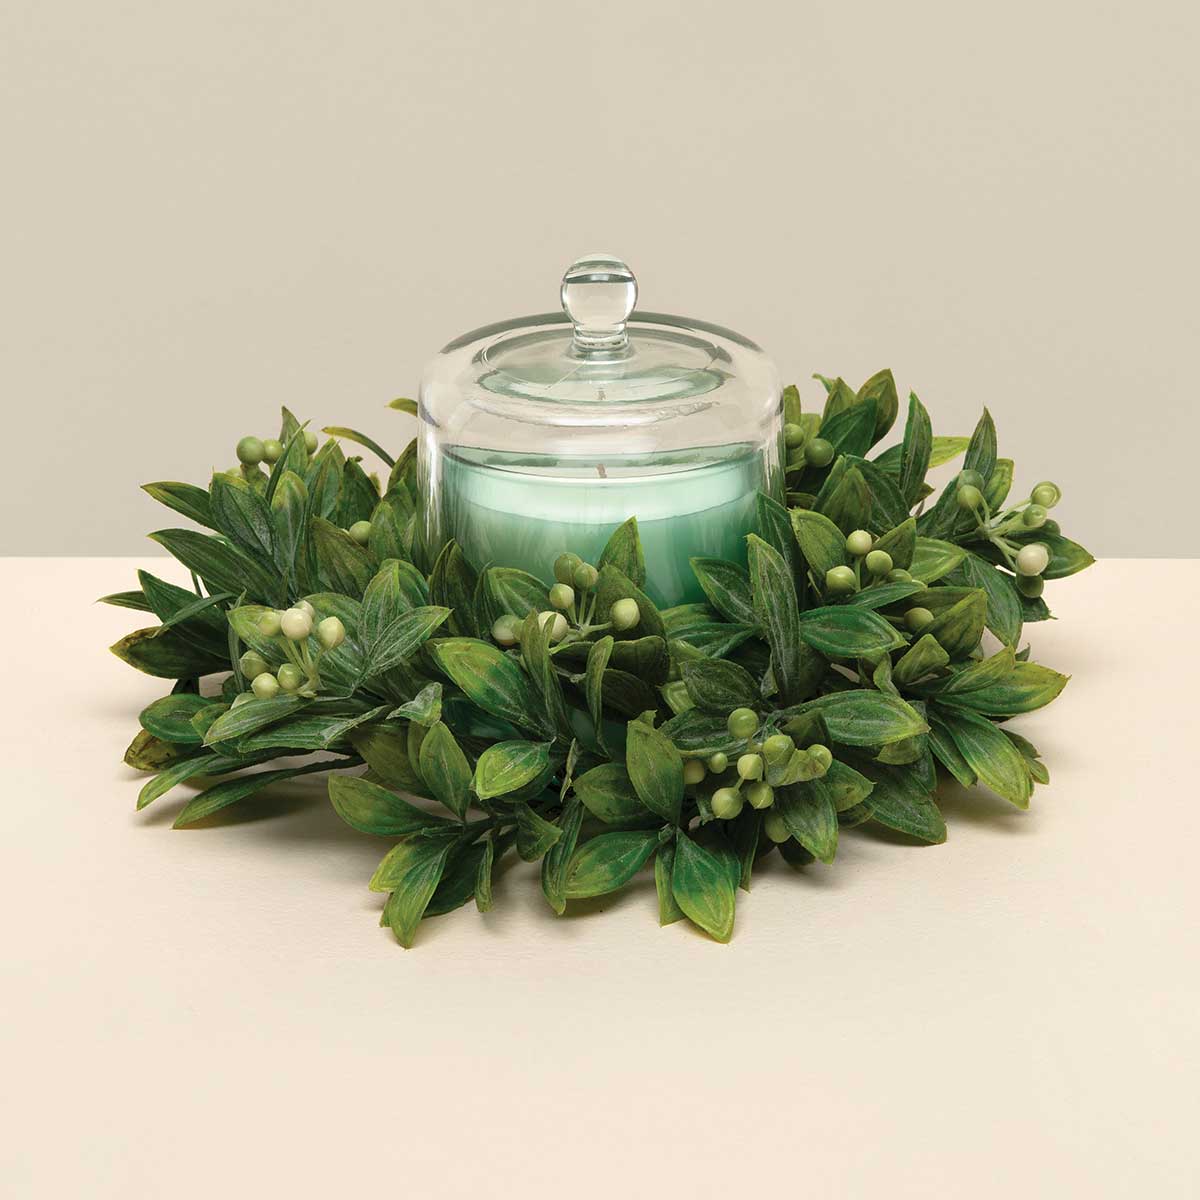 CANDLE RING PRIVET/BERRY 10IN (INNER RING 4.5IN) GREEN